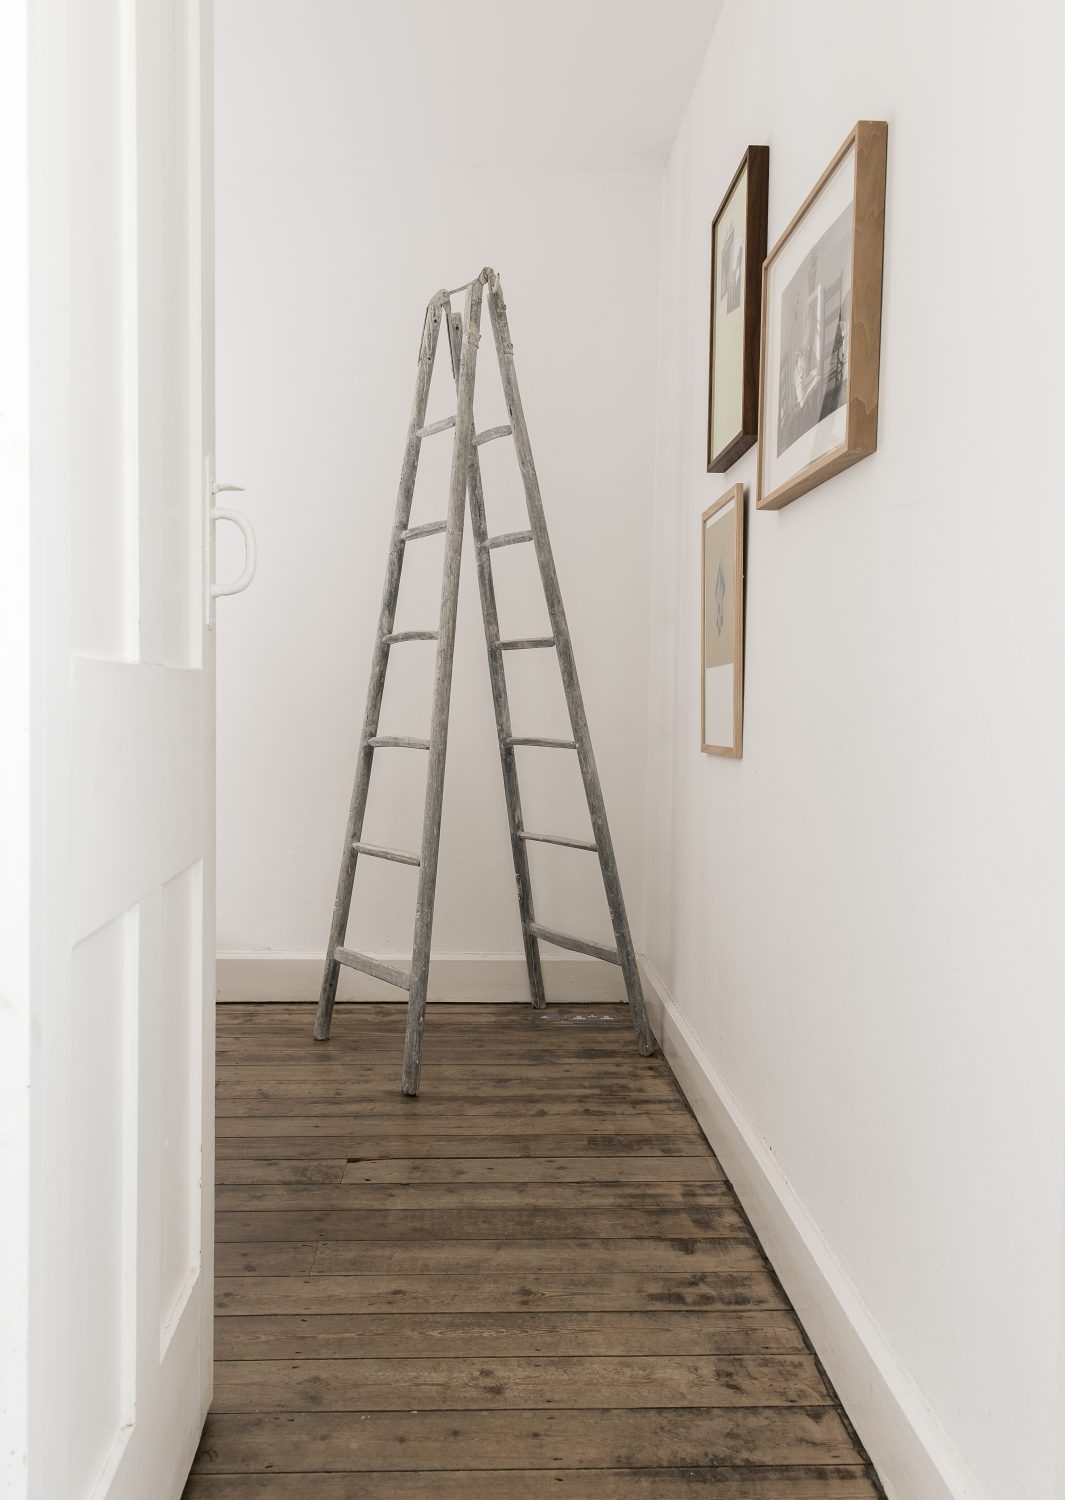 In the East facing double bedroom, Marta stripped off the old wallpaper and liked the distressed plaster beneath it so much she decided to keep it. She has had the 1950s wicker chair for many years. The French painter’s ladder was found at Wish Barn Antiques in Rye